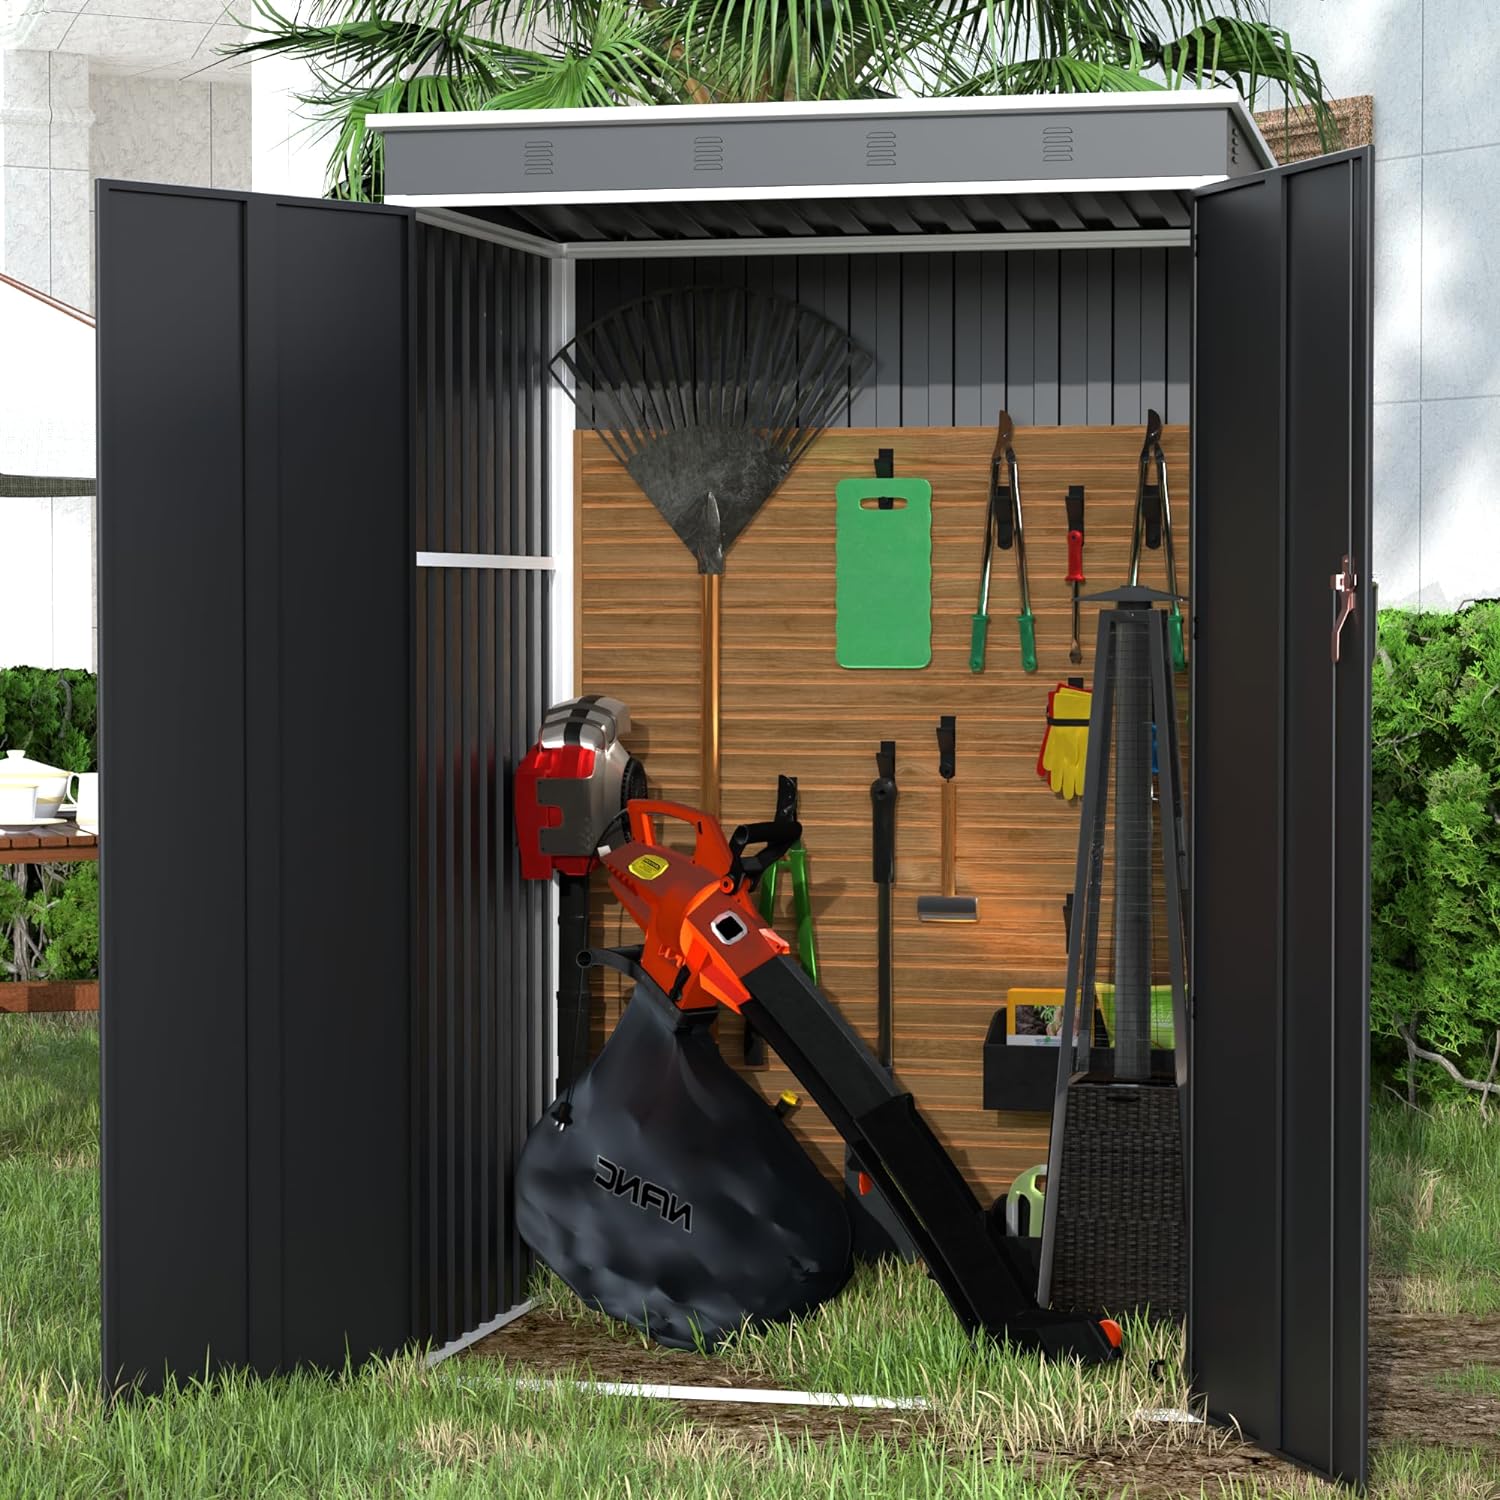 Yizosh Metal Outdoor Storage Shed, Steel Utility Tool Shed Storage House with Door & Lock, Metal Sheds Outdoor Storage for Backyard Garden Patio Lawn (H6'xW4'x D3') Black&White